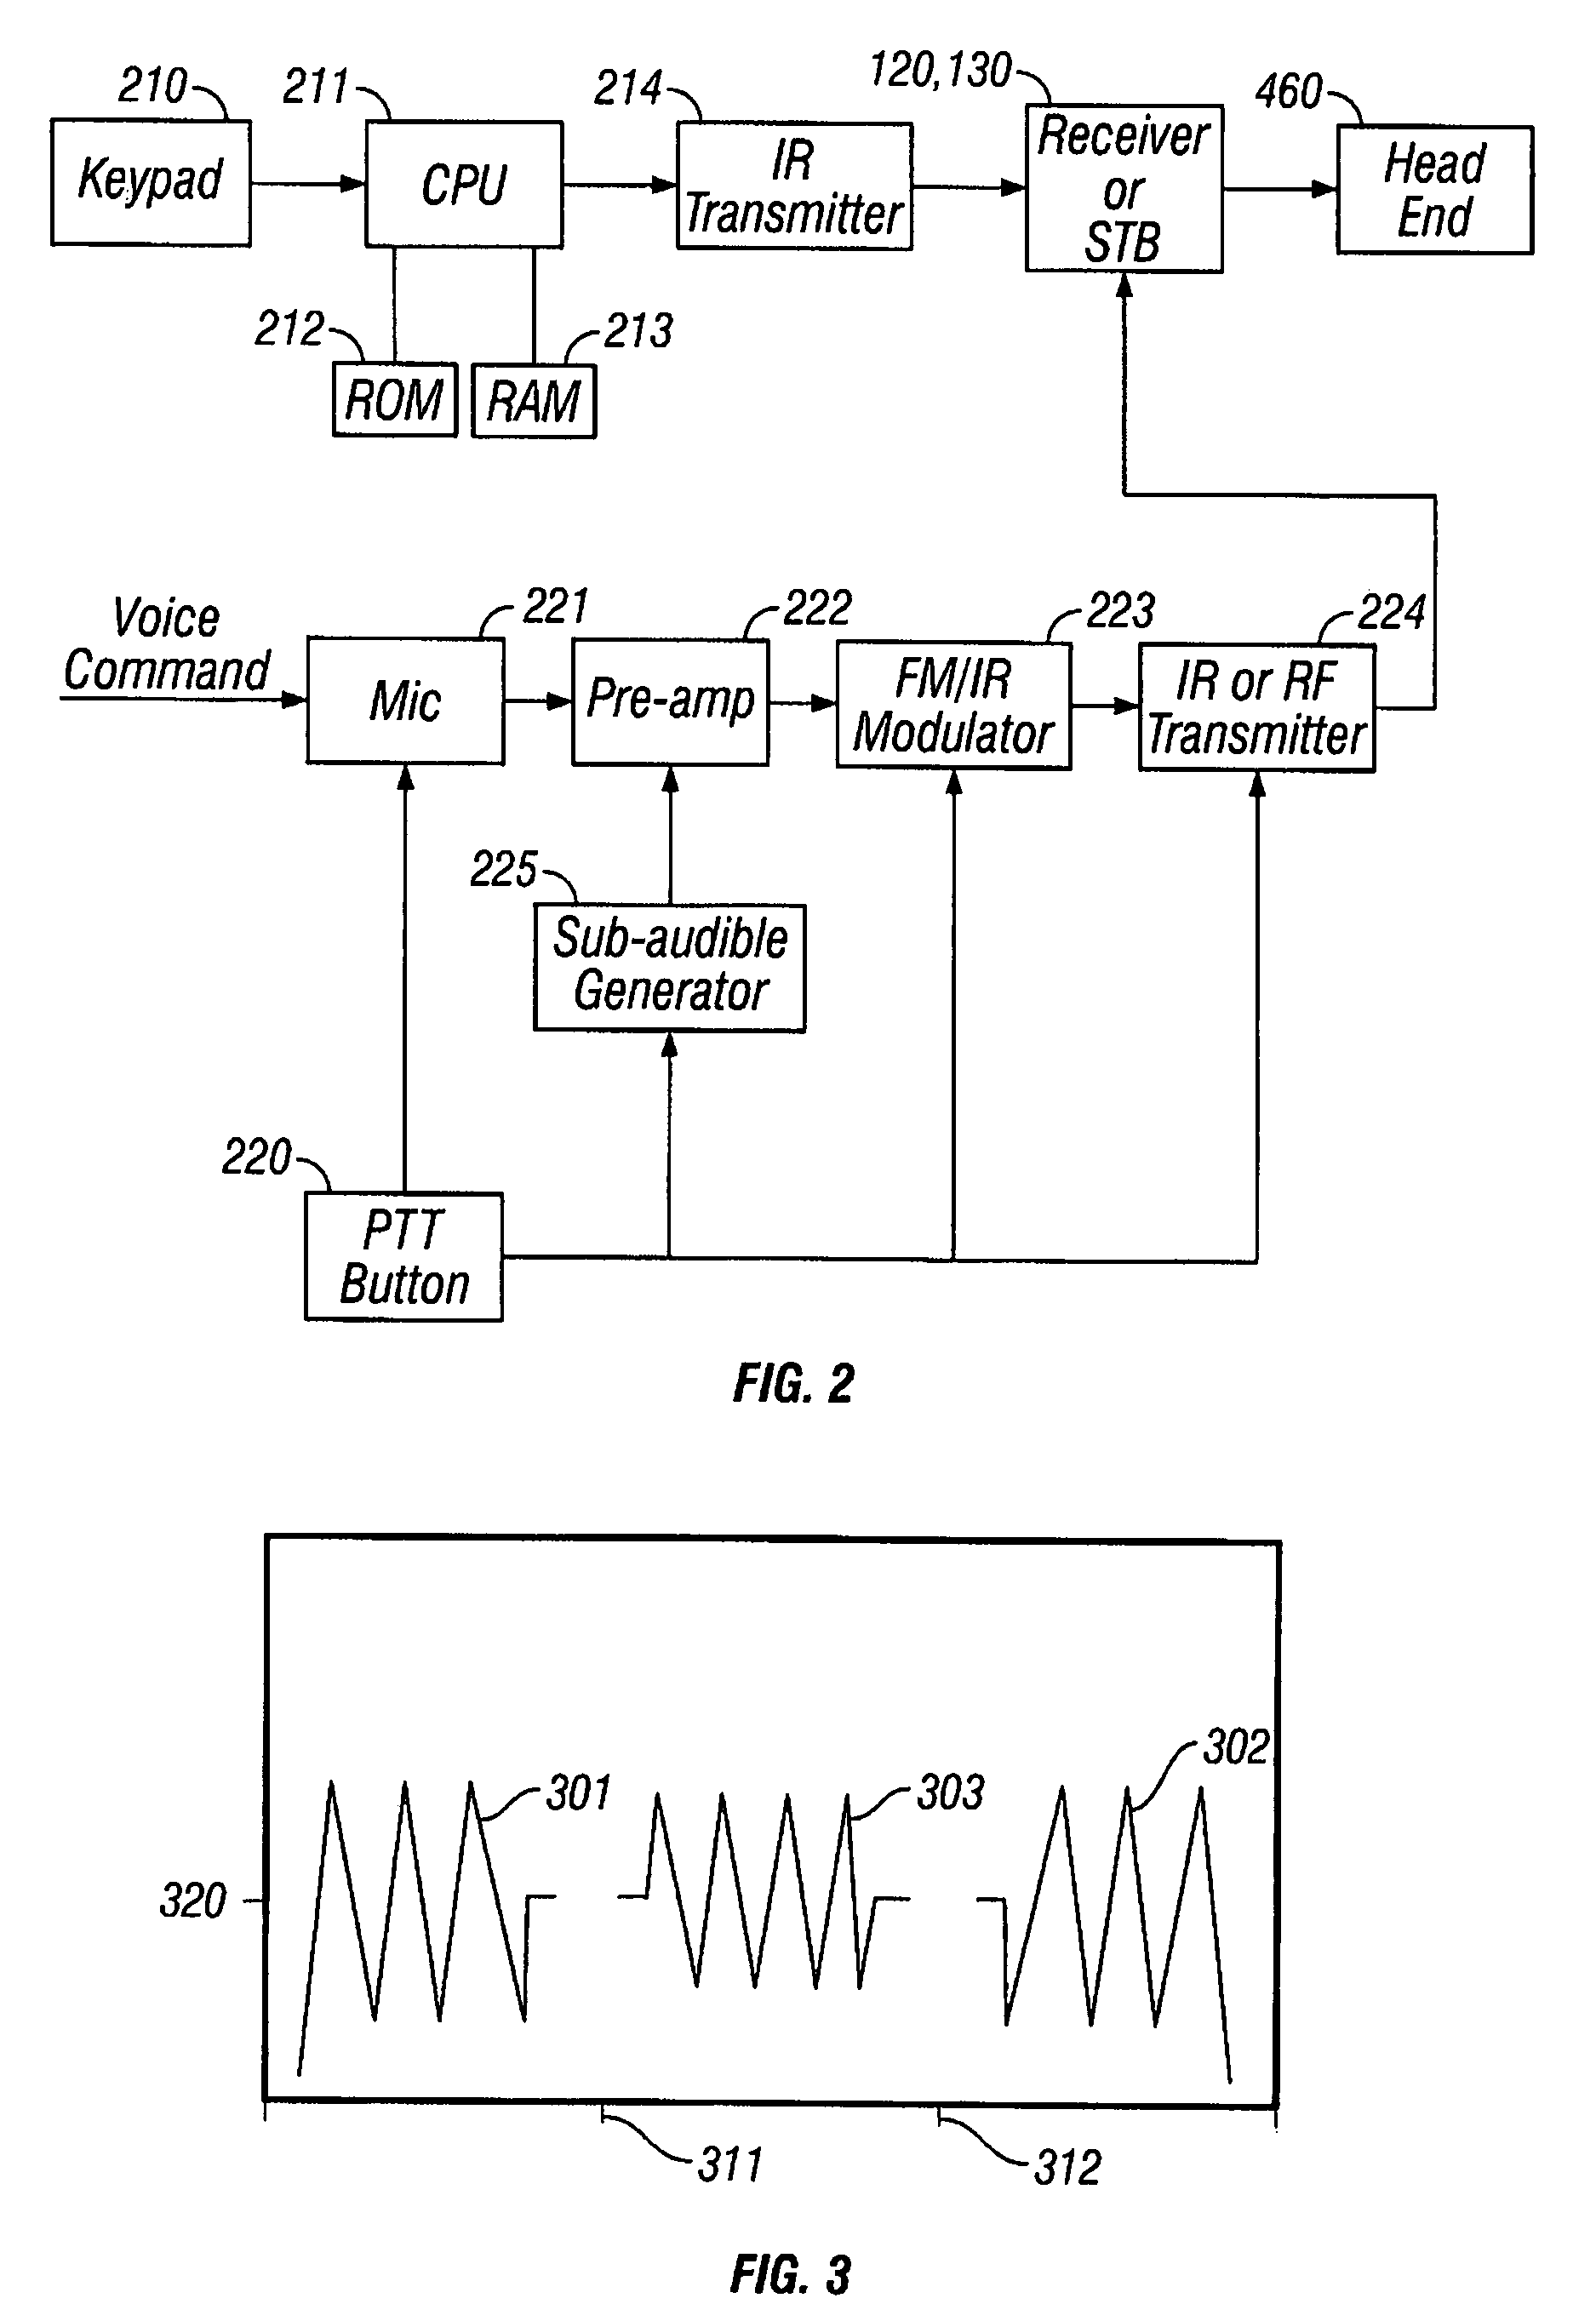 Method and apparatus for voice control of a television control device